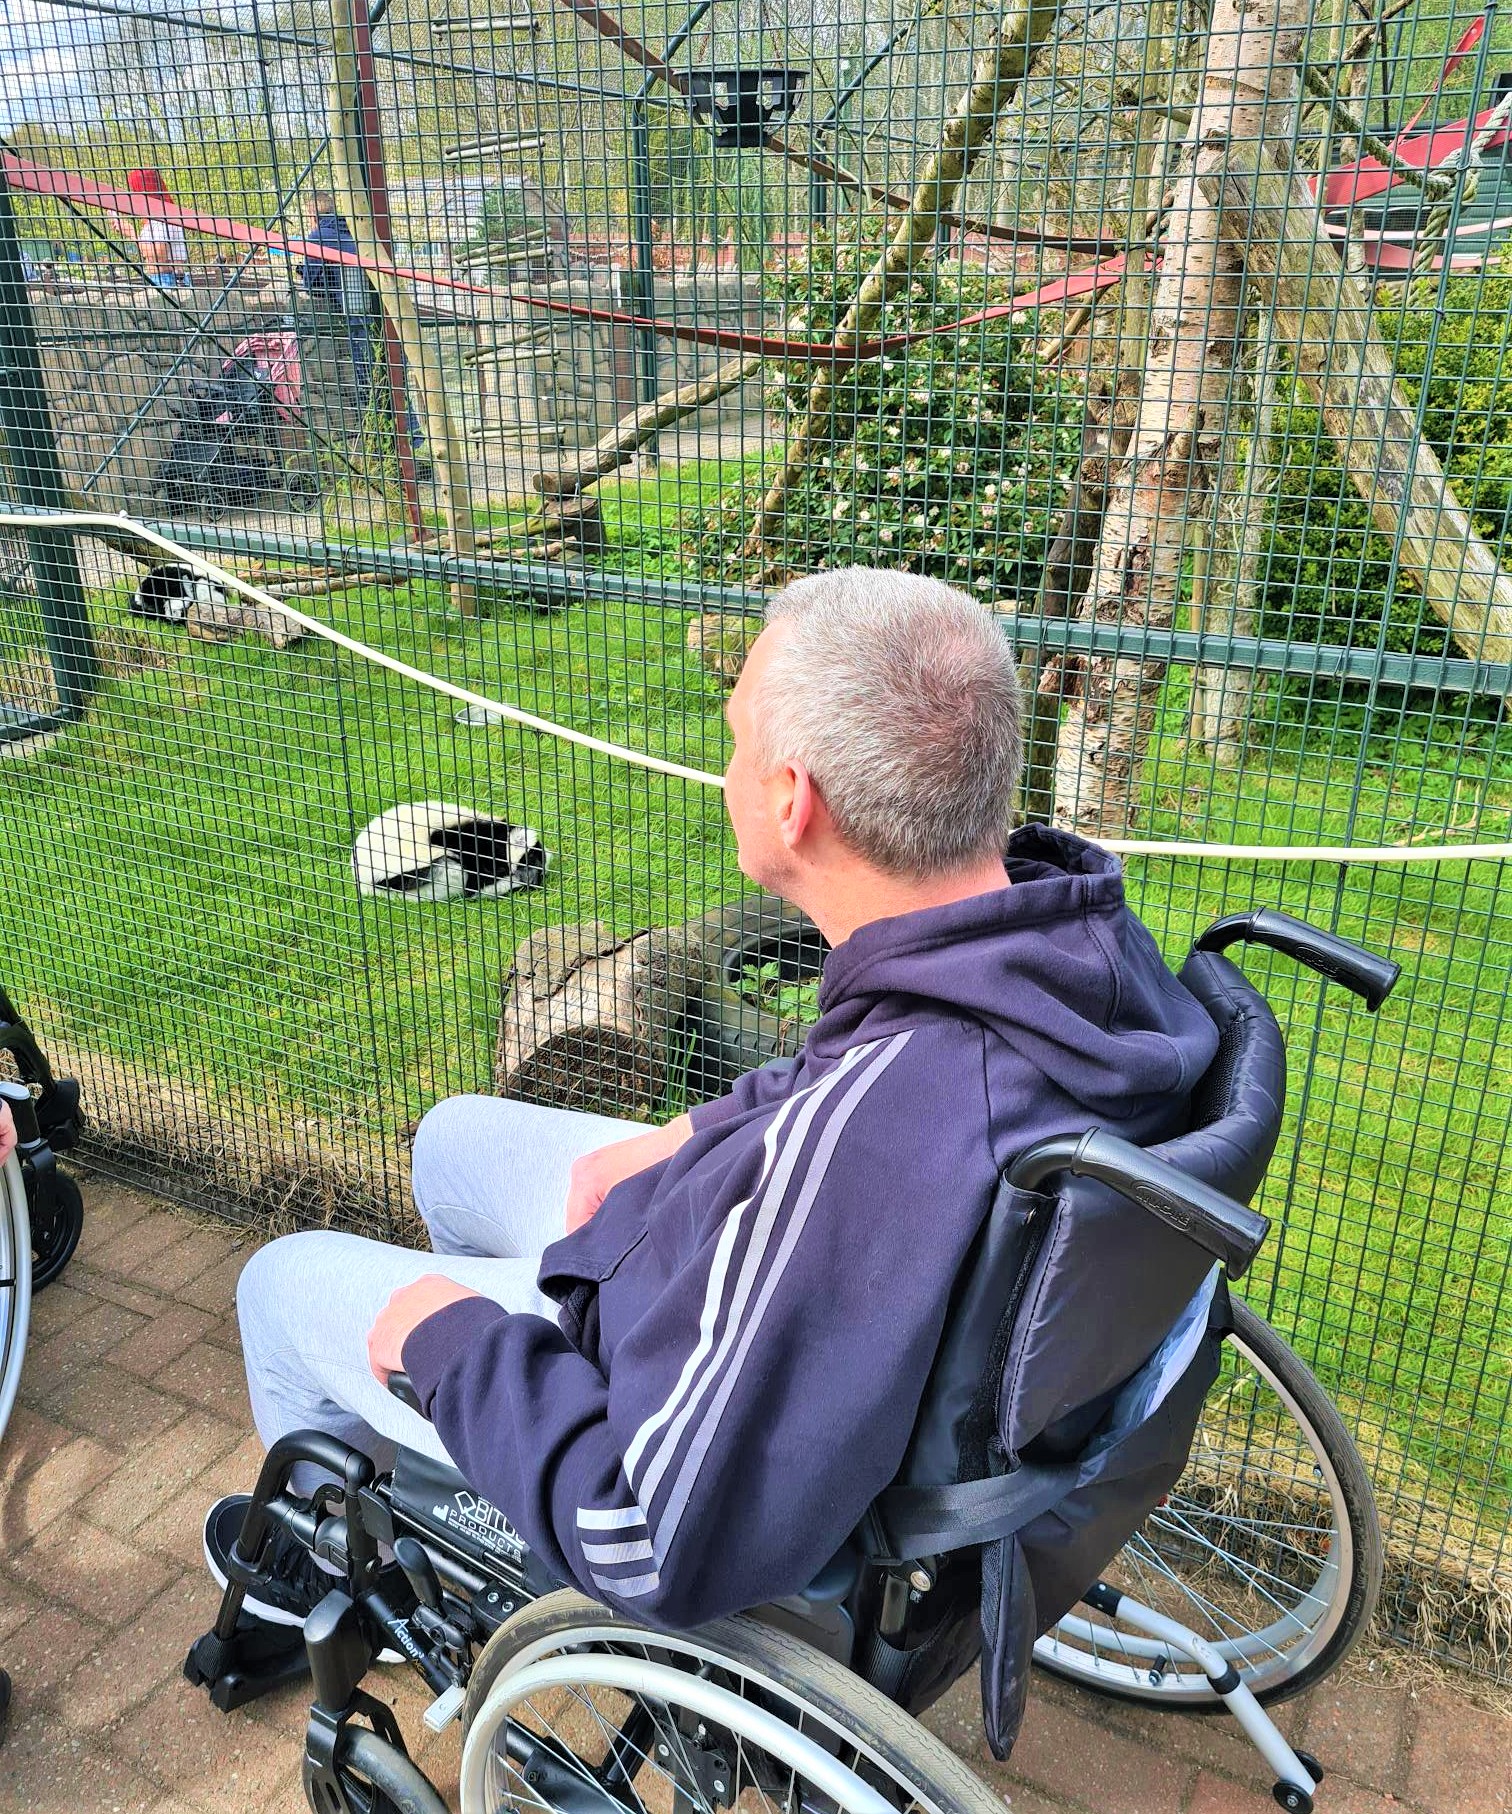 resident in wheelchair looking at large rabbit in enclosure